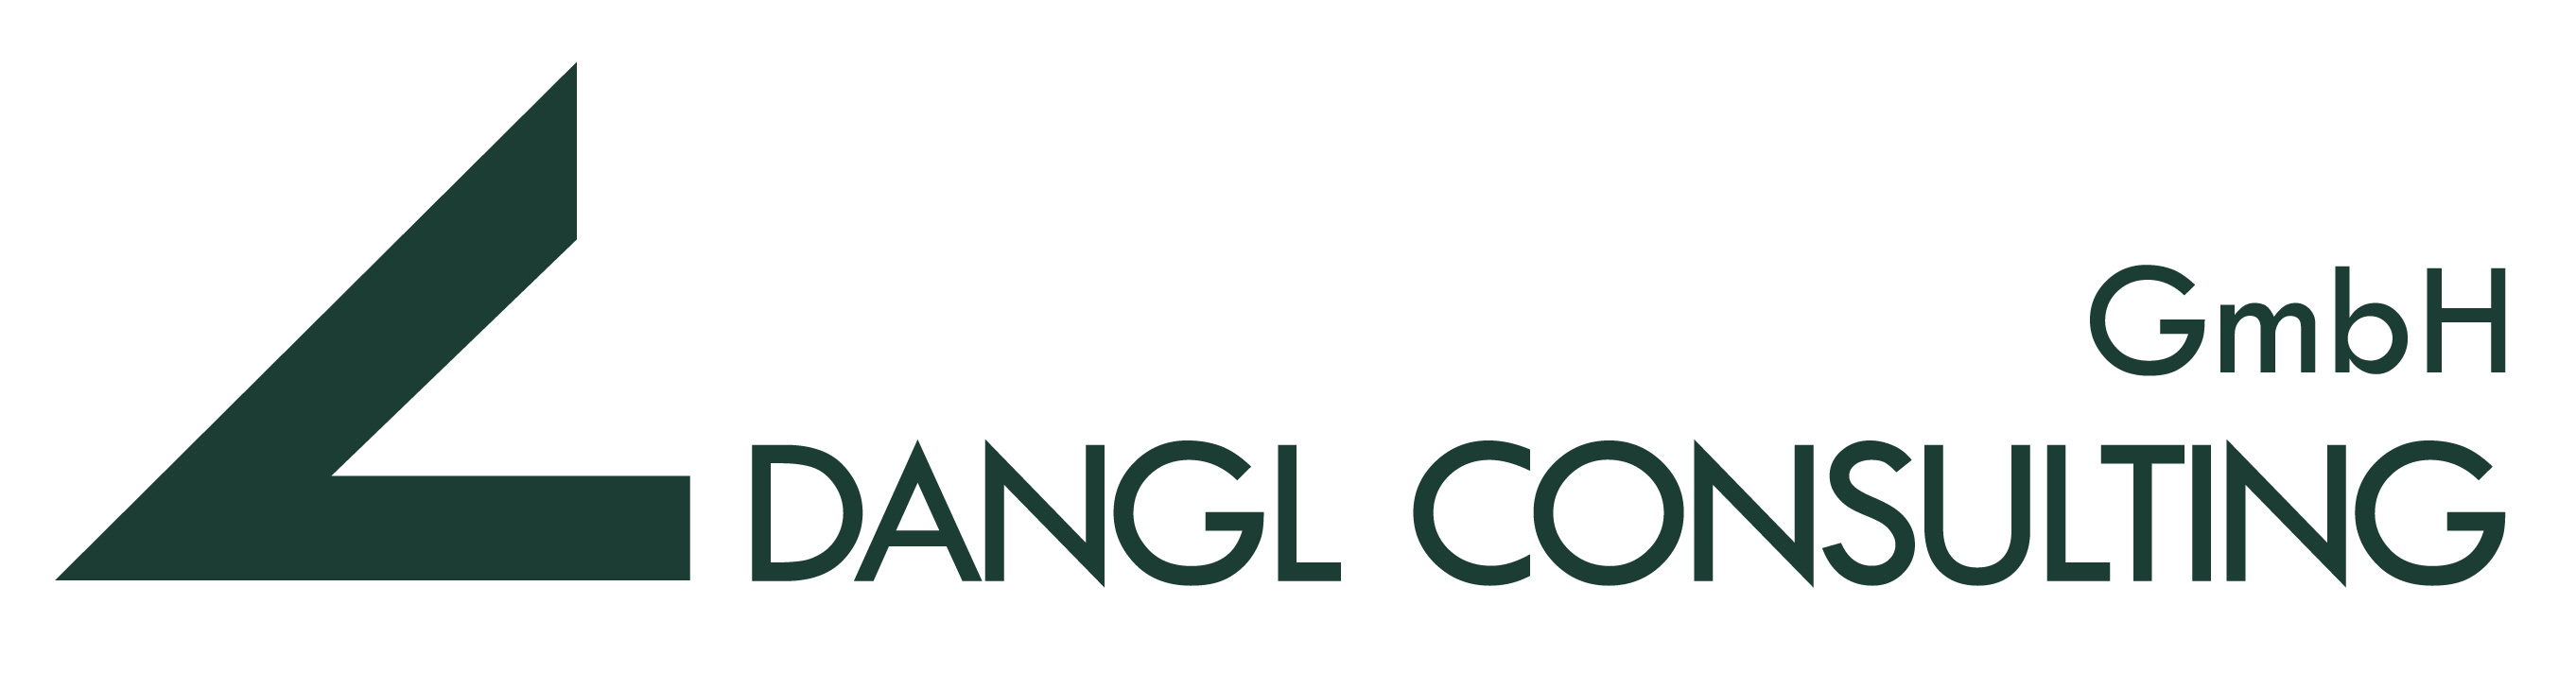 Dangl Consulting GmbH